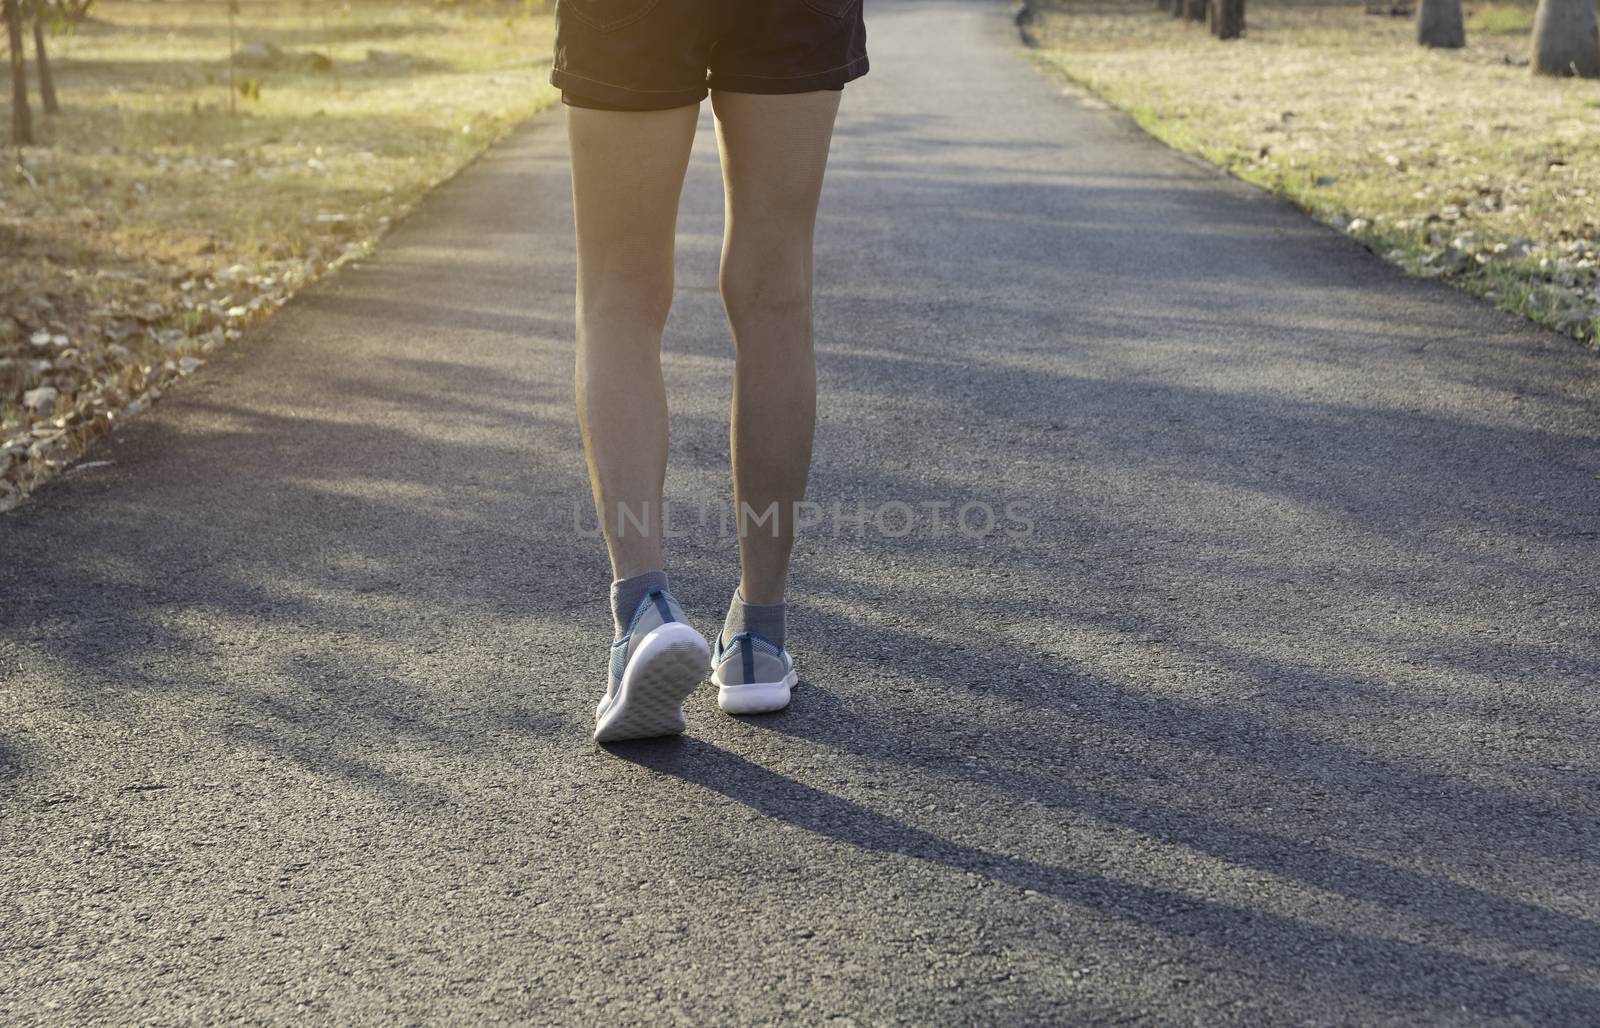 A woman running at the morning for jogging, exercising and healt by kirisa99